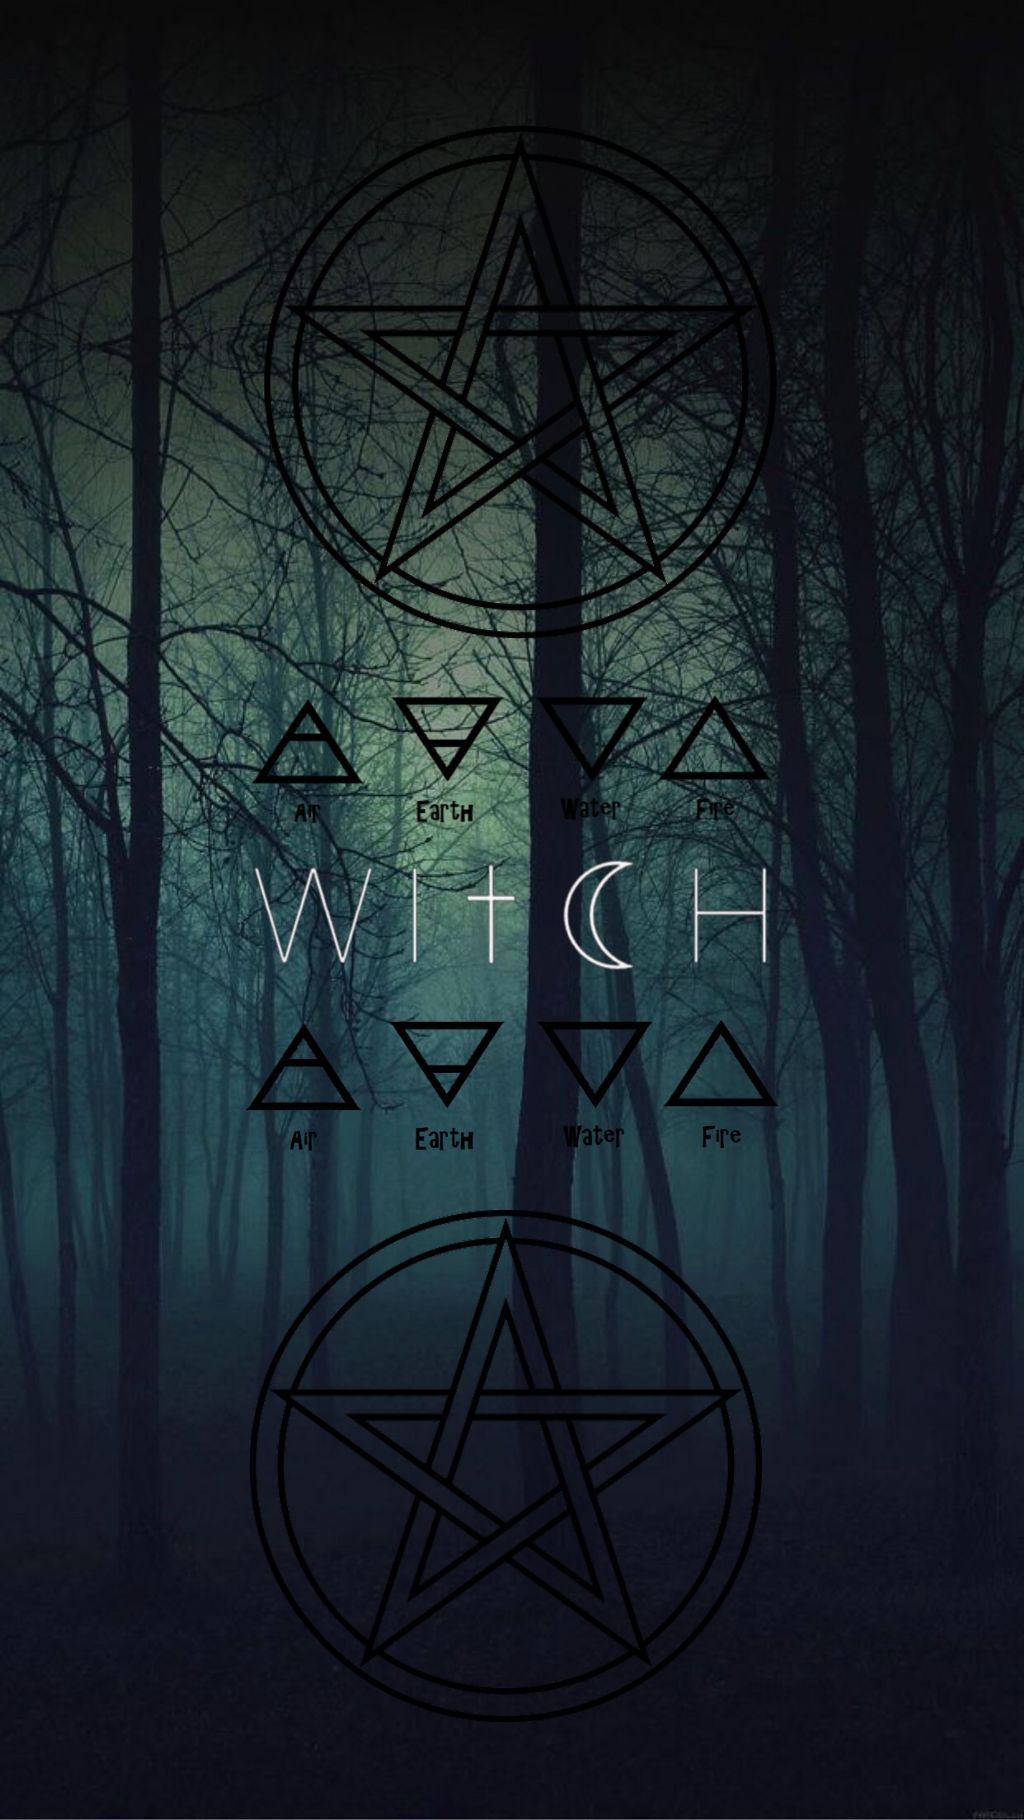 Witchy Aesthetic Wallpapers